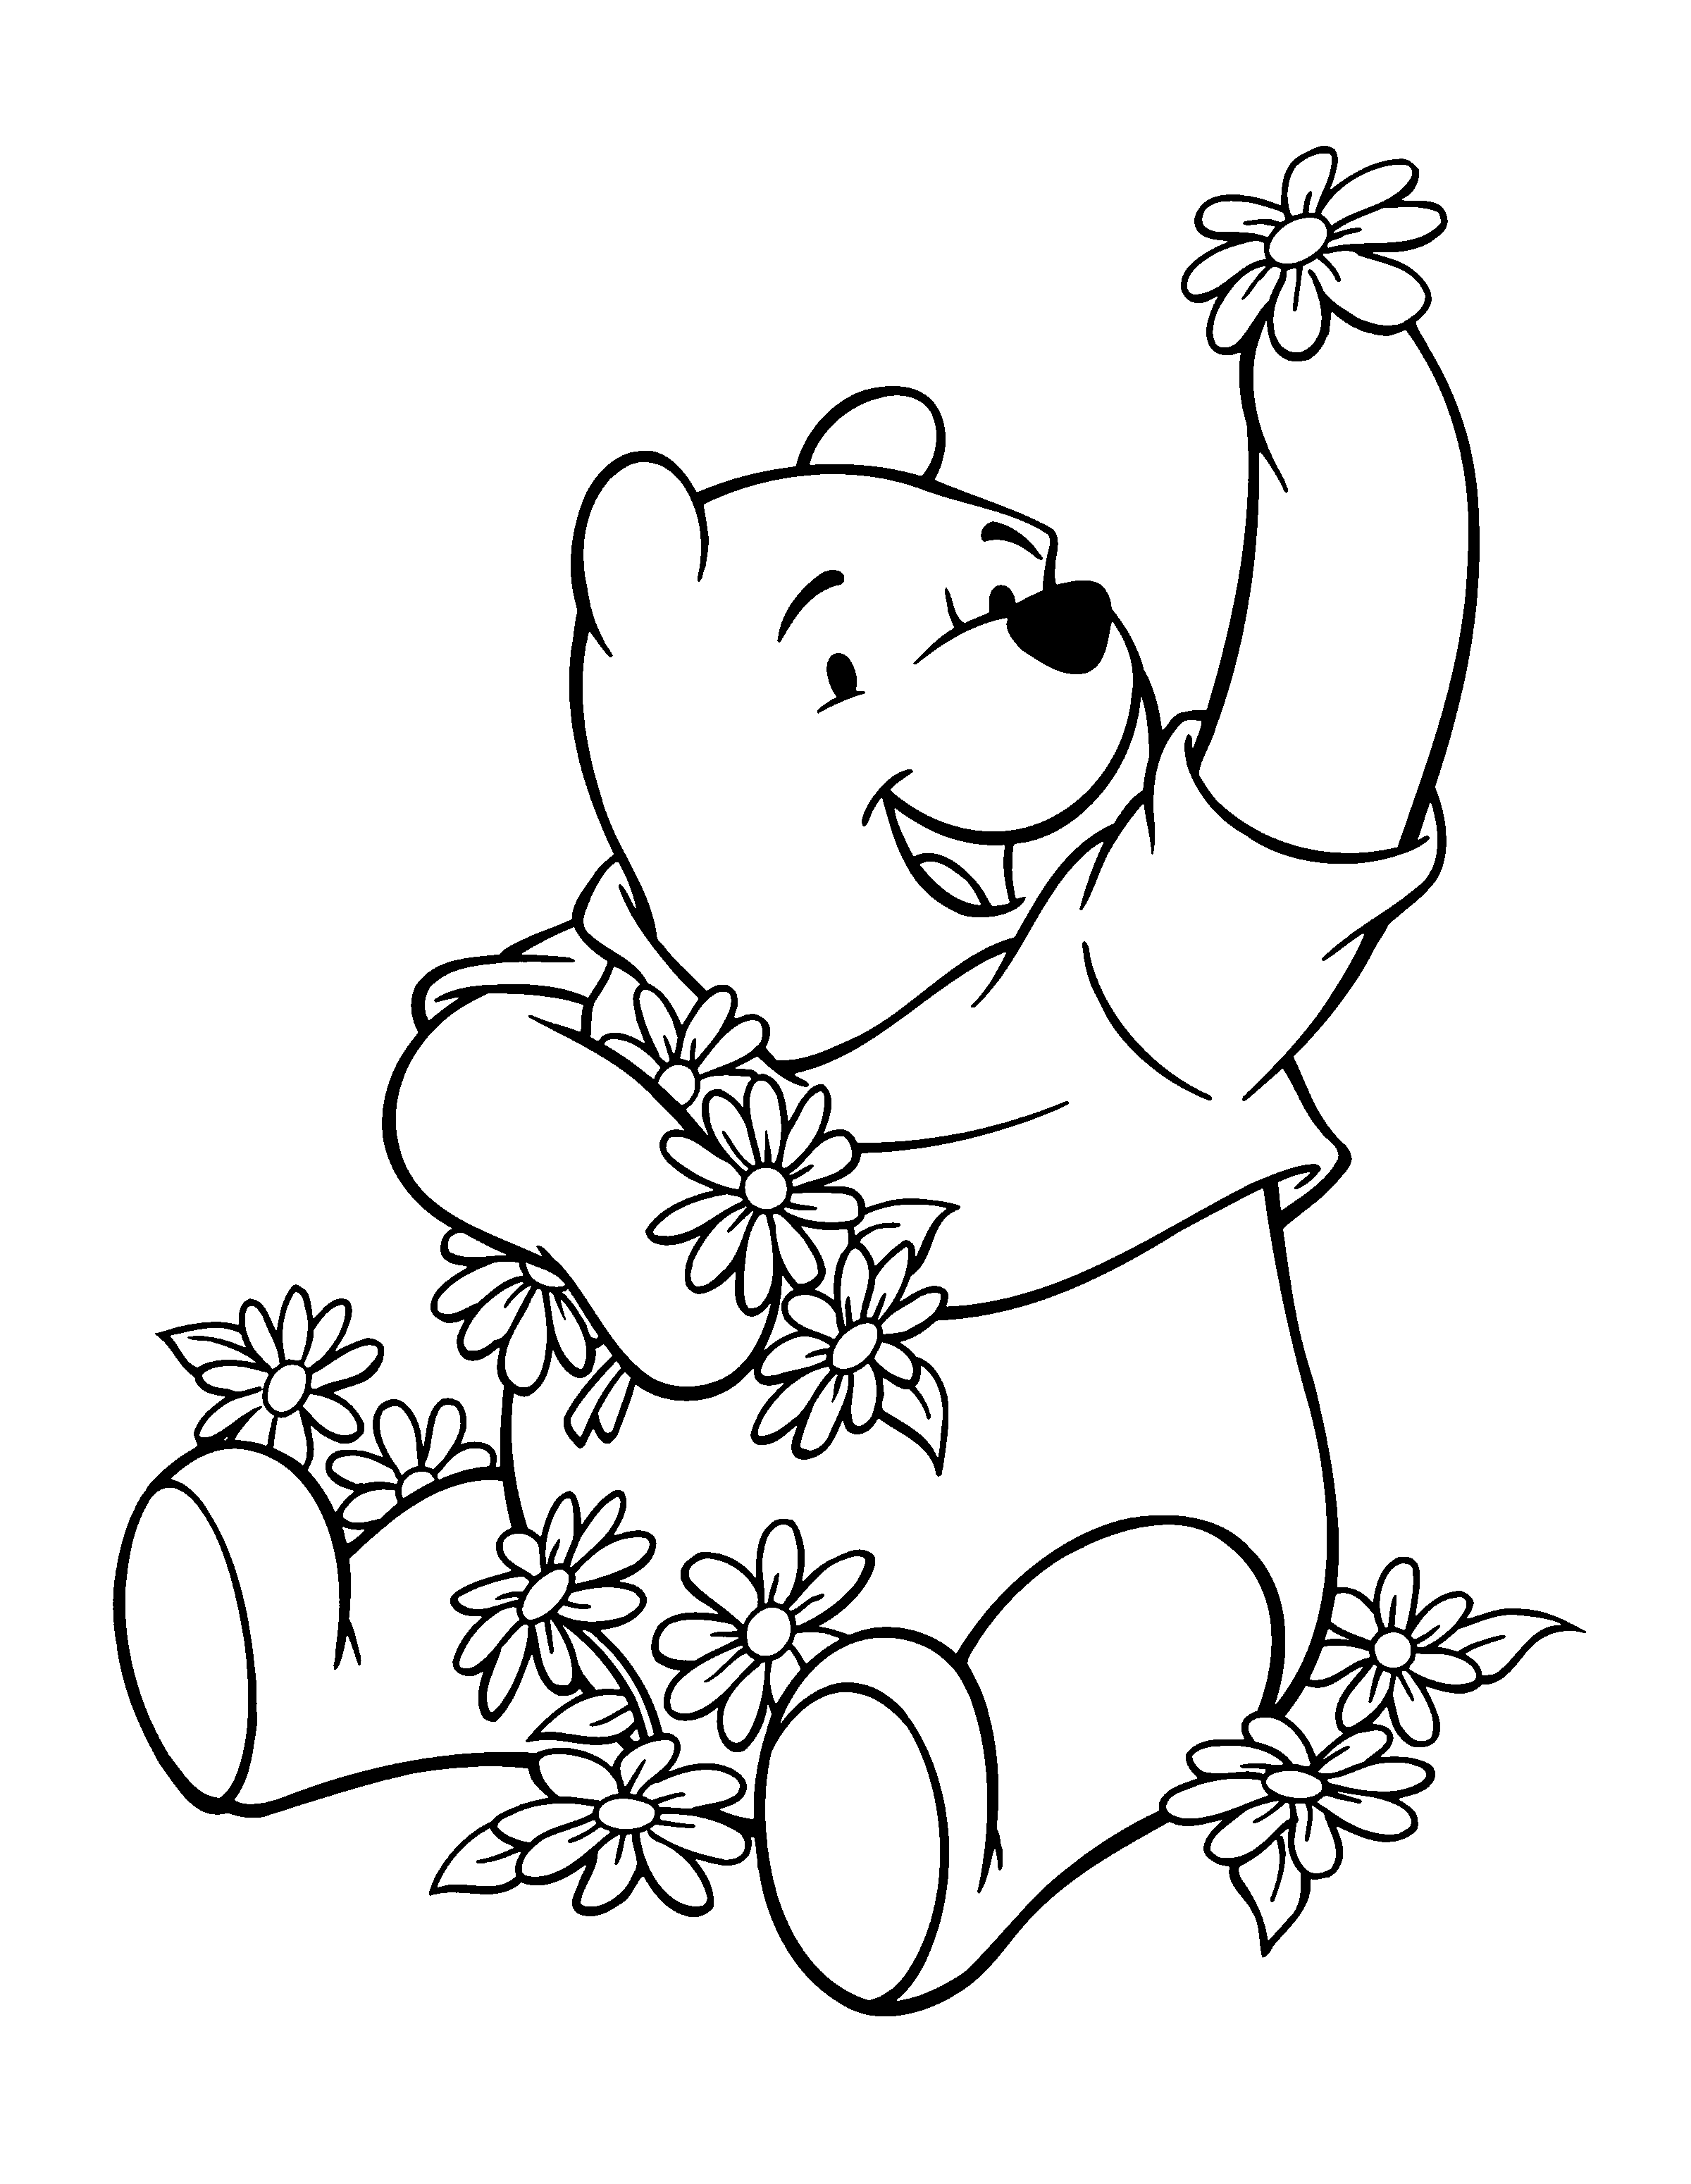 winnie the pooh and friends easter coloring pages